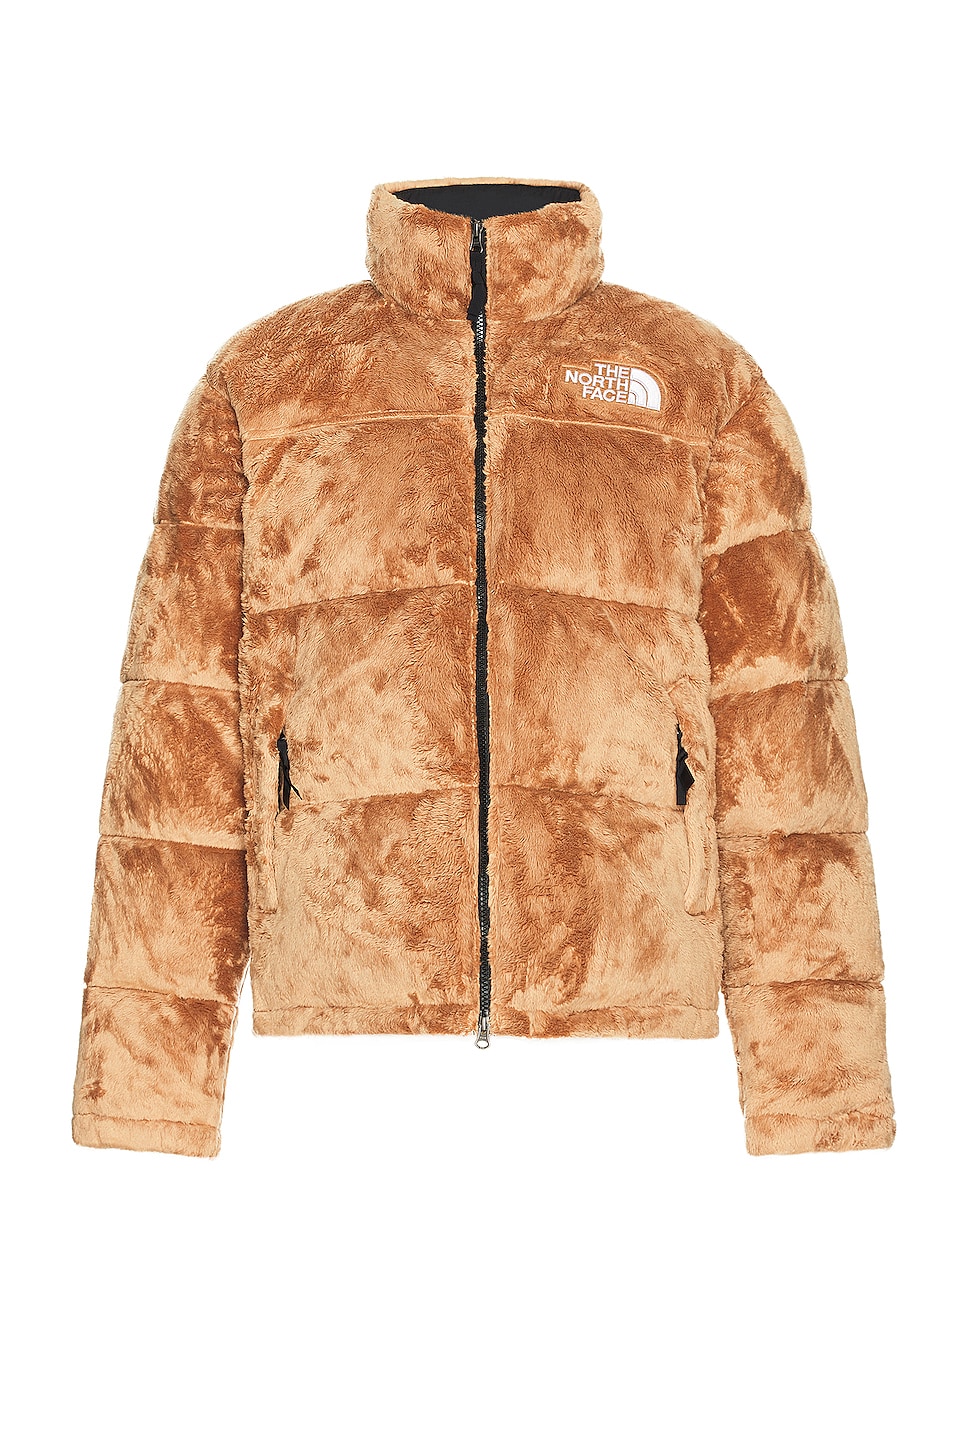 The North Face Versa Velour Nuptse In Almond Butter in Almond 